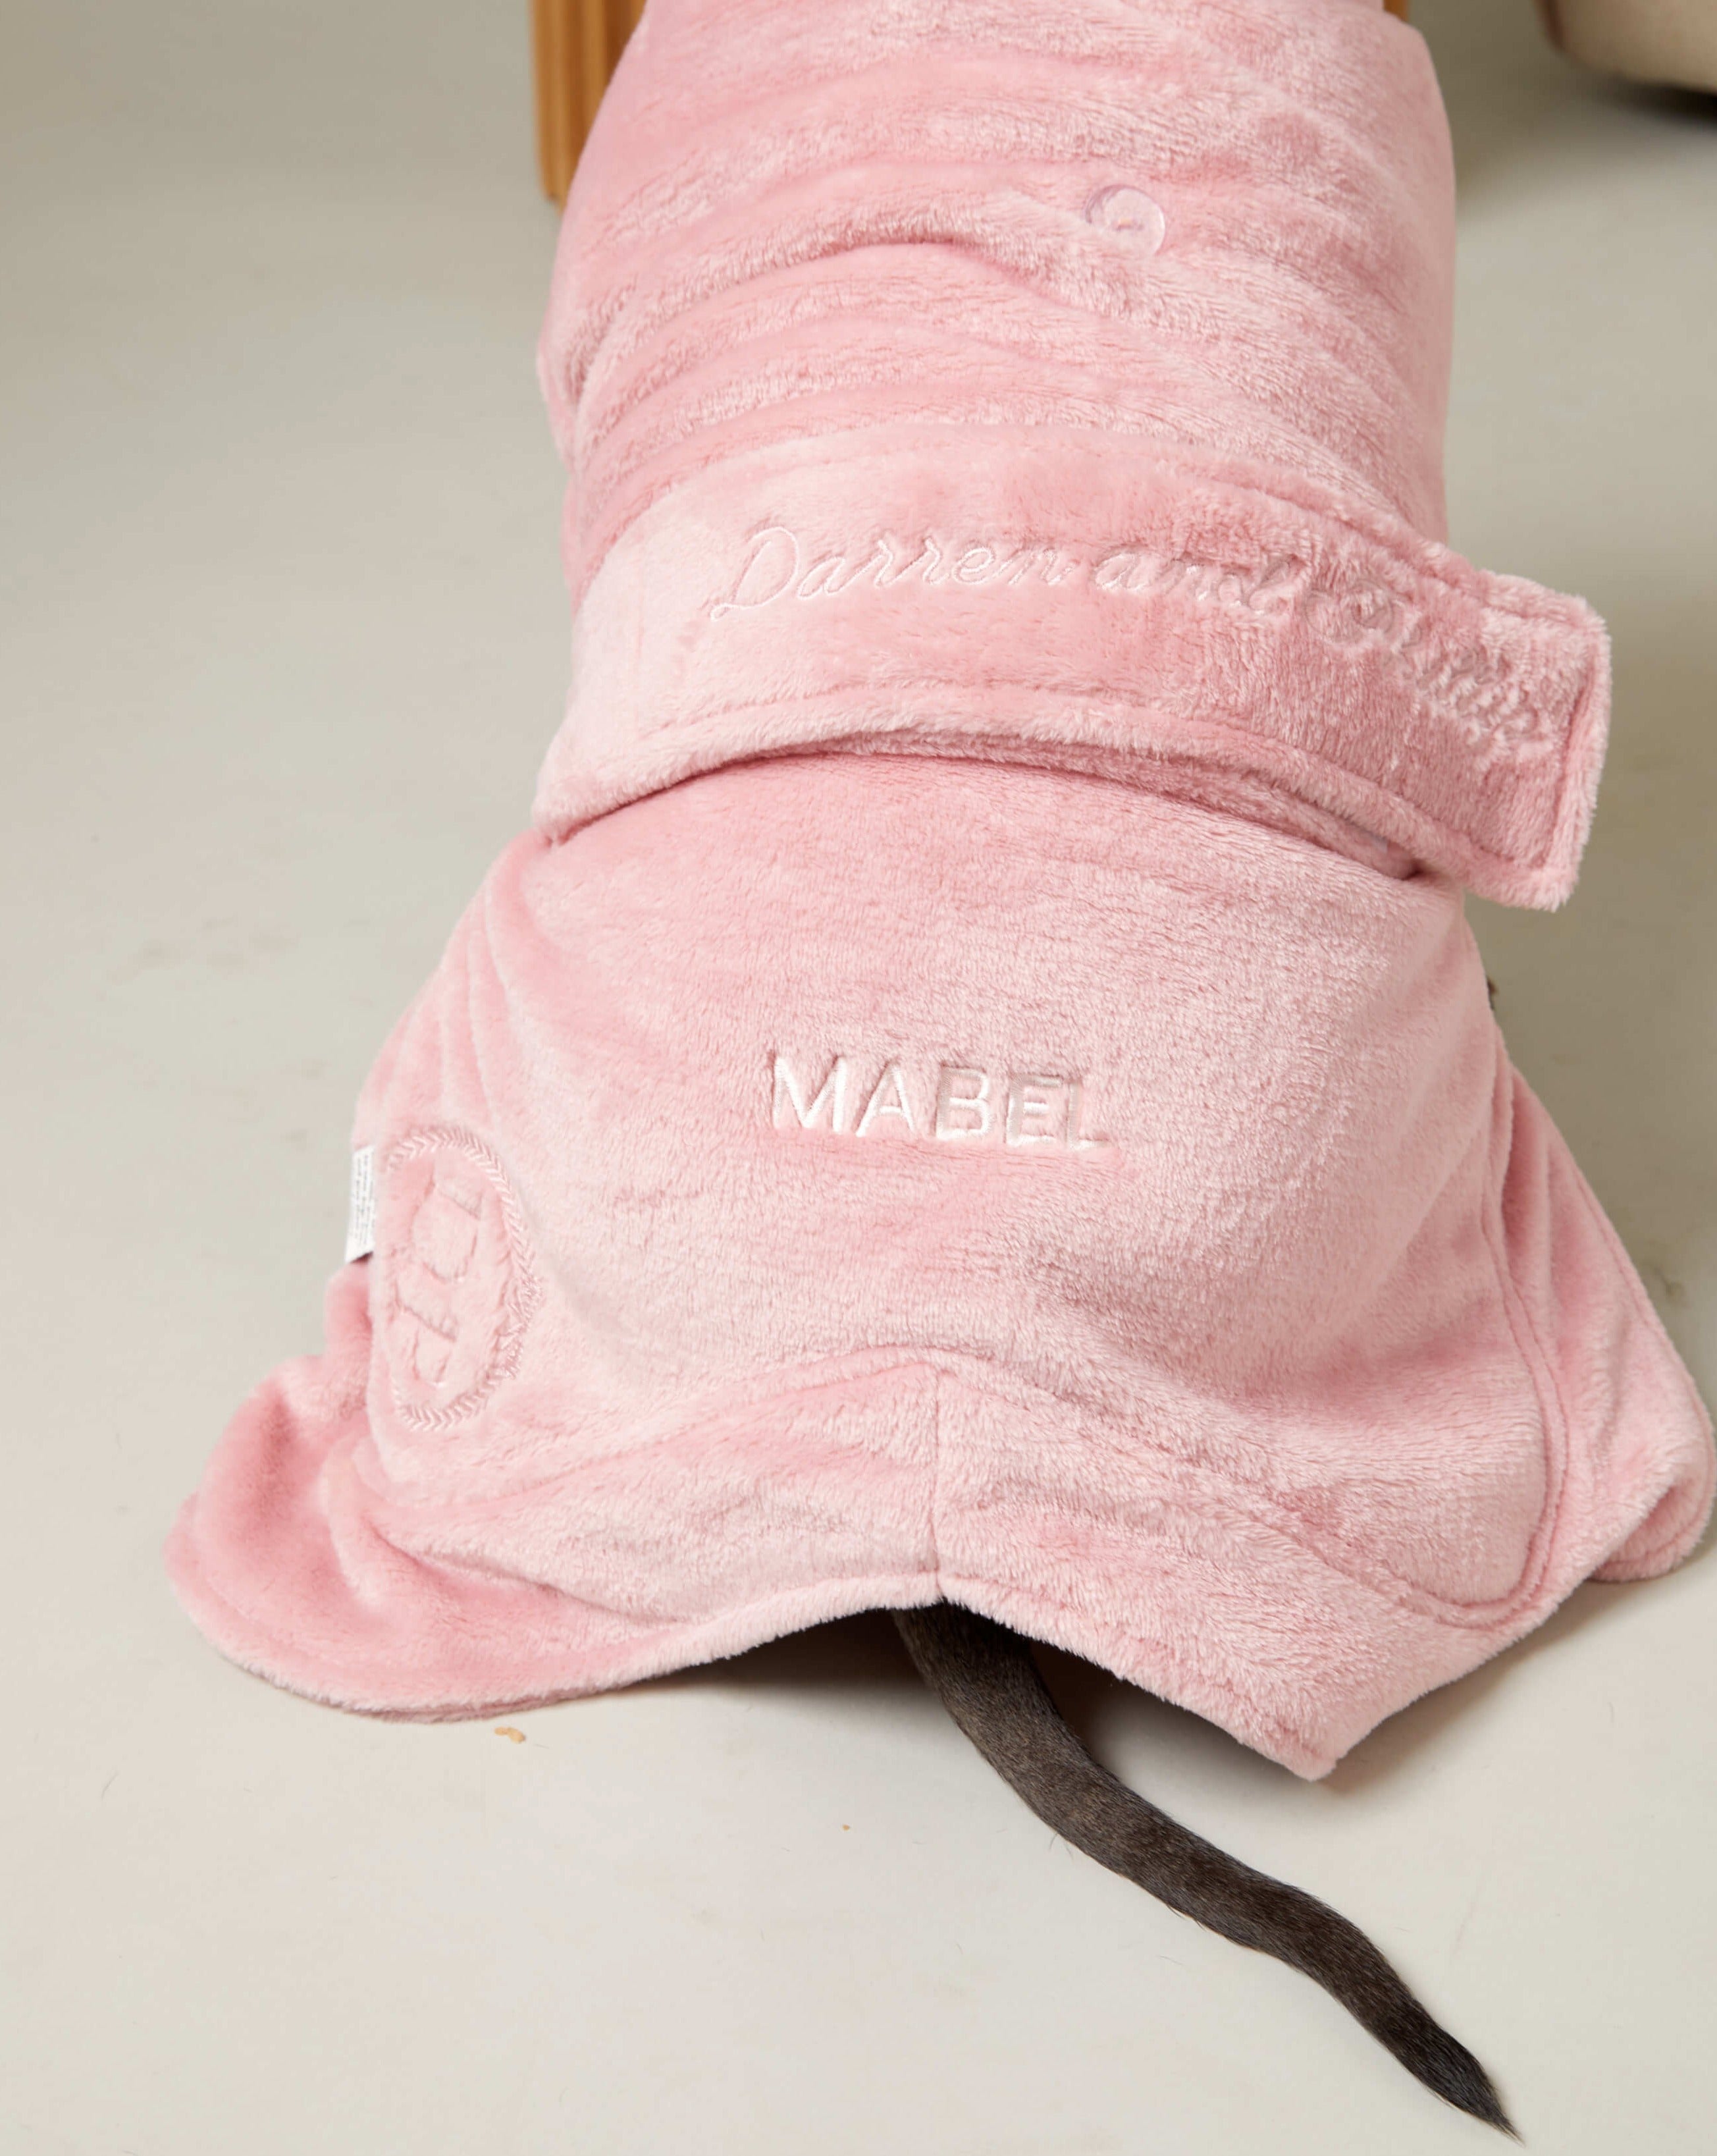 The Snuggle Buddy Personalised Dog Robe - Perfect Pink